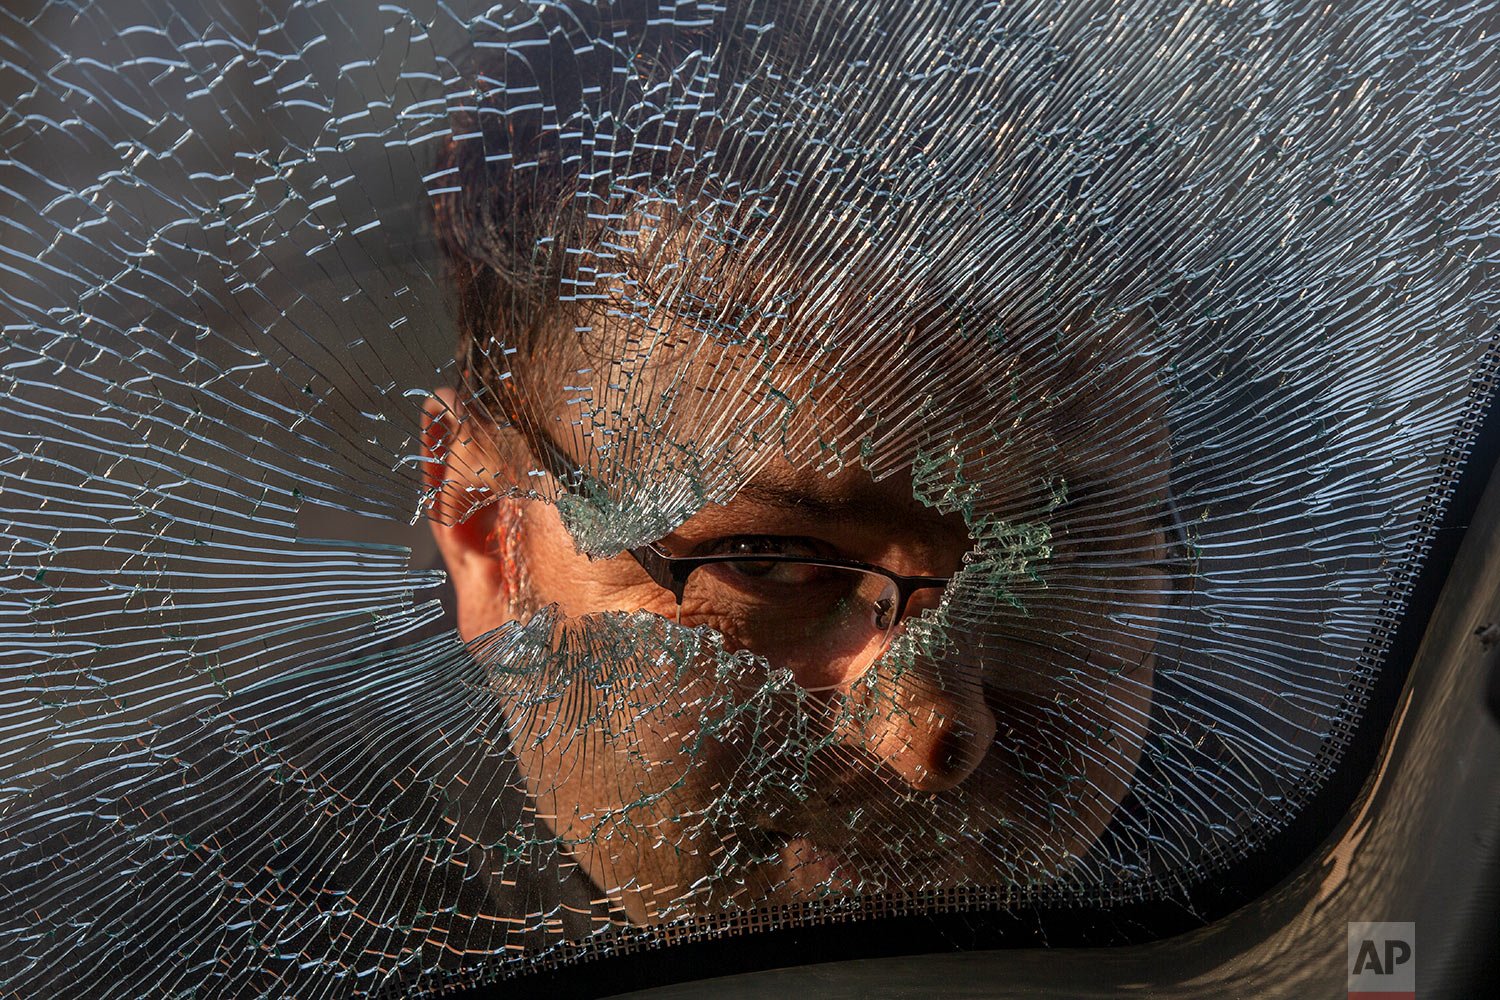  A Kashmiri man looks through the broken glass of a parked vehicle near the site of a shootout on the outskirts of Srinagar, Indian controlled Kashmir, Friday, Dec. 31, 2021.  (AP Photo/Dar Yasin) 